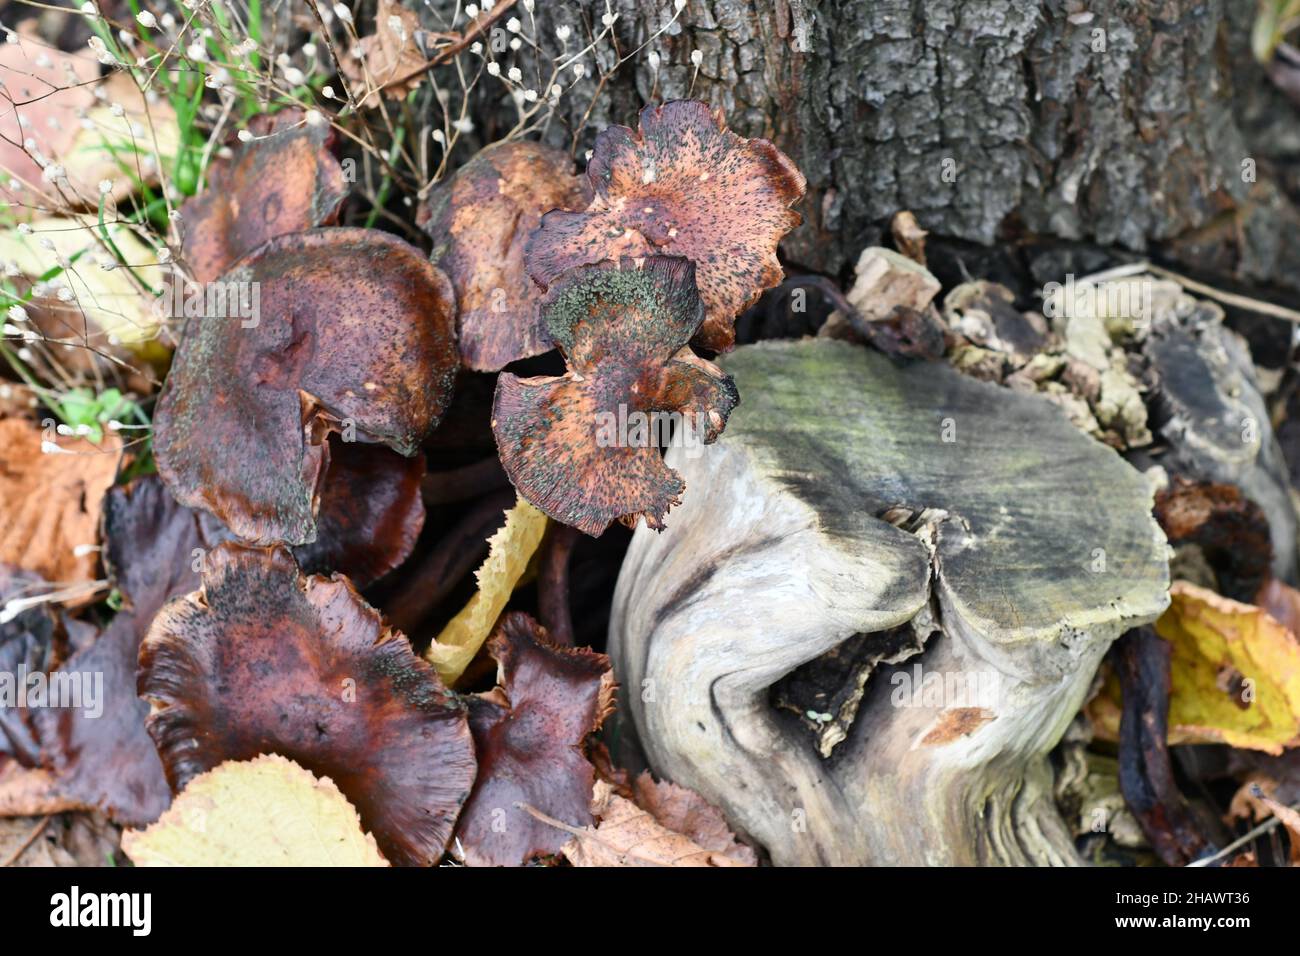 Chestnut Brown large wild mushrooms, fungi at the base of tree trunk Stock Photo